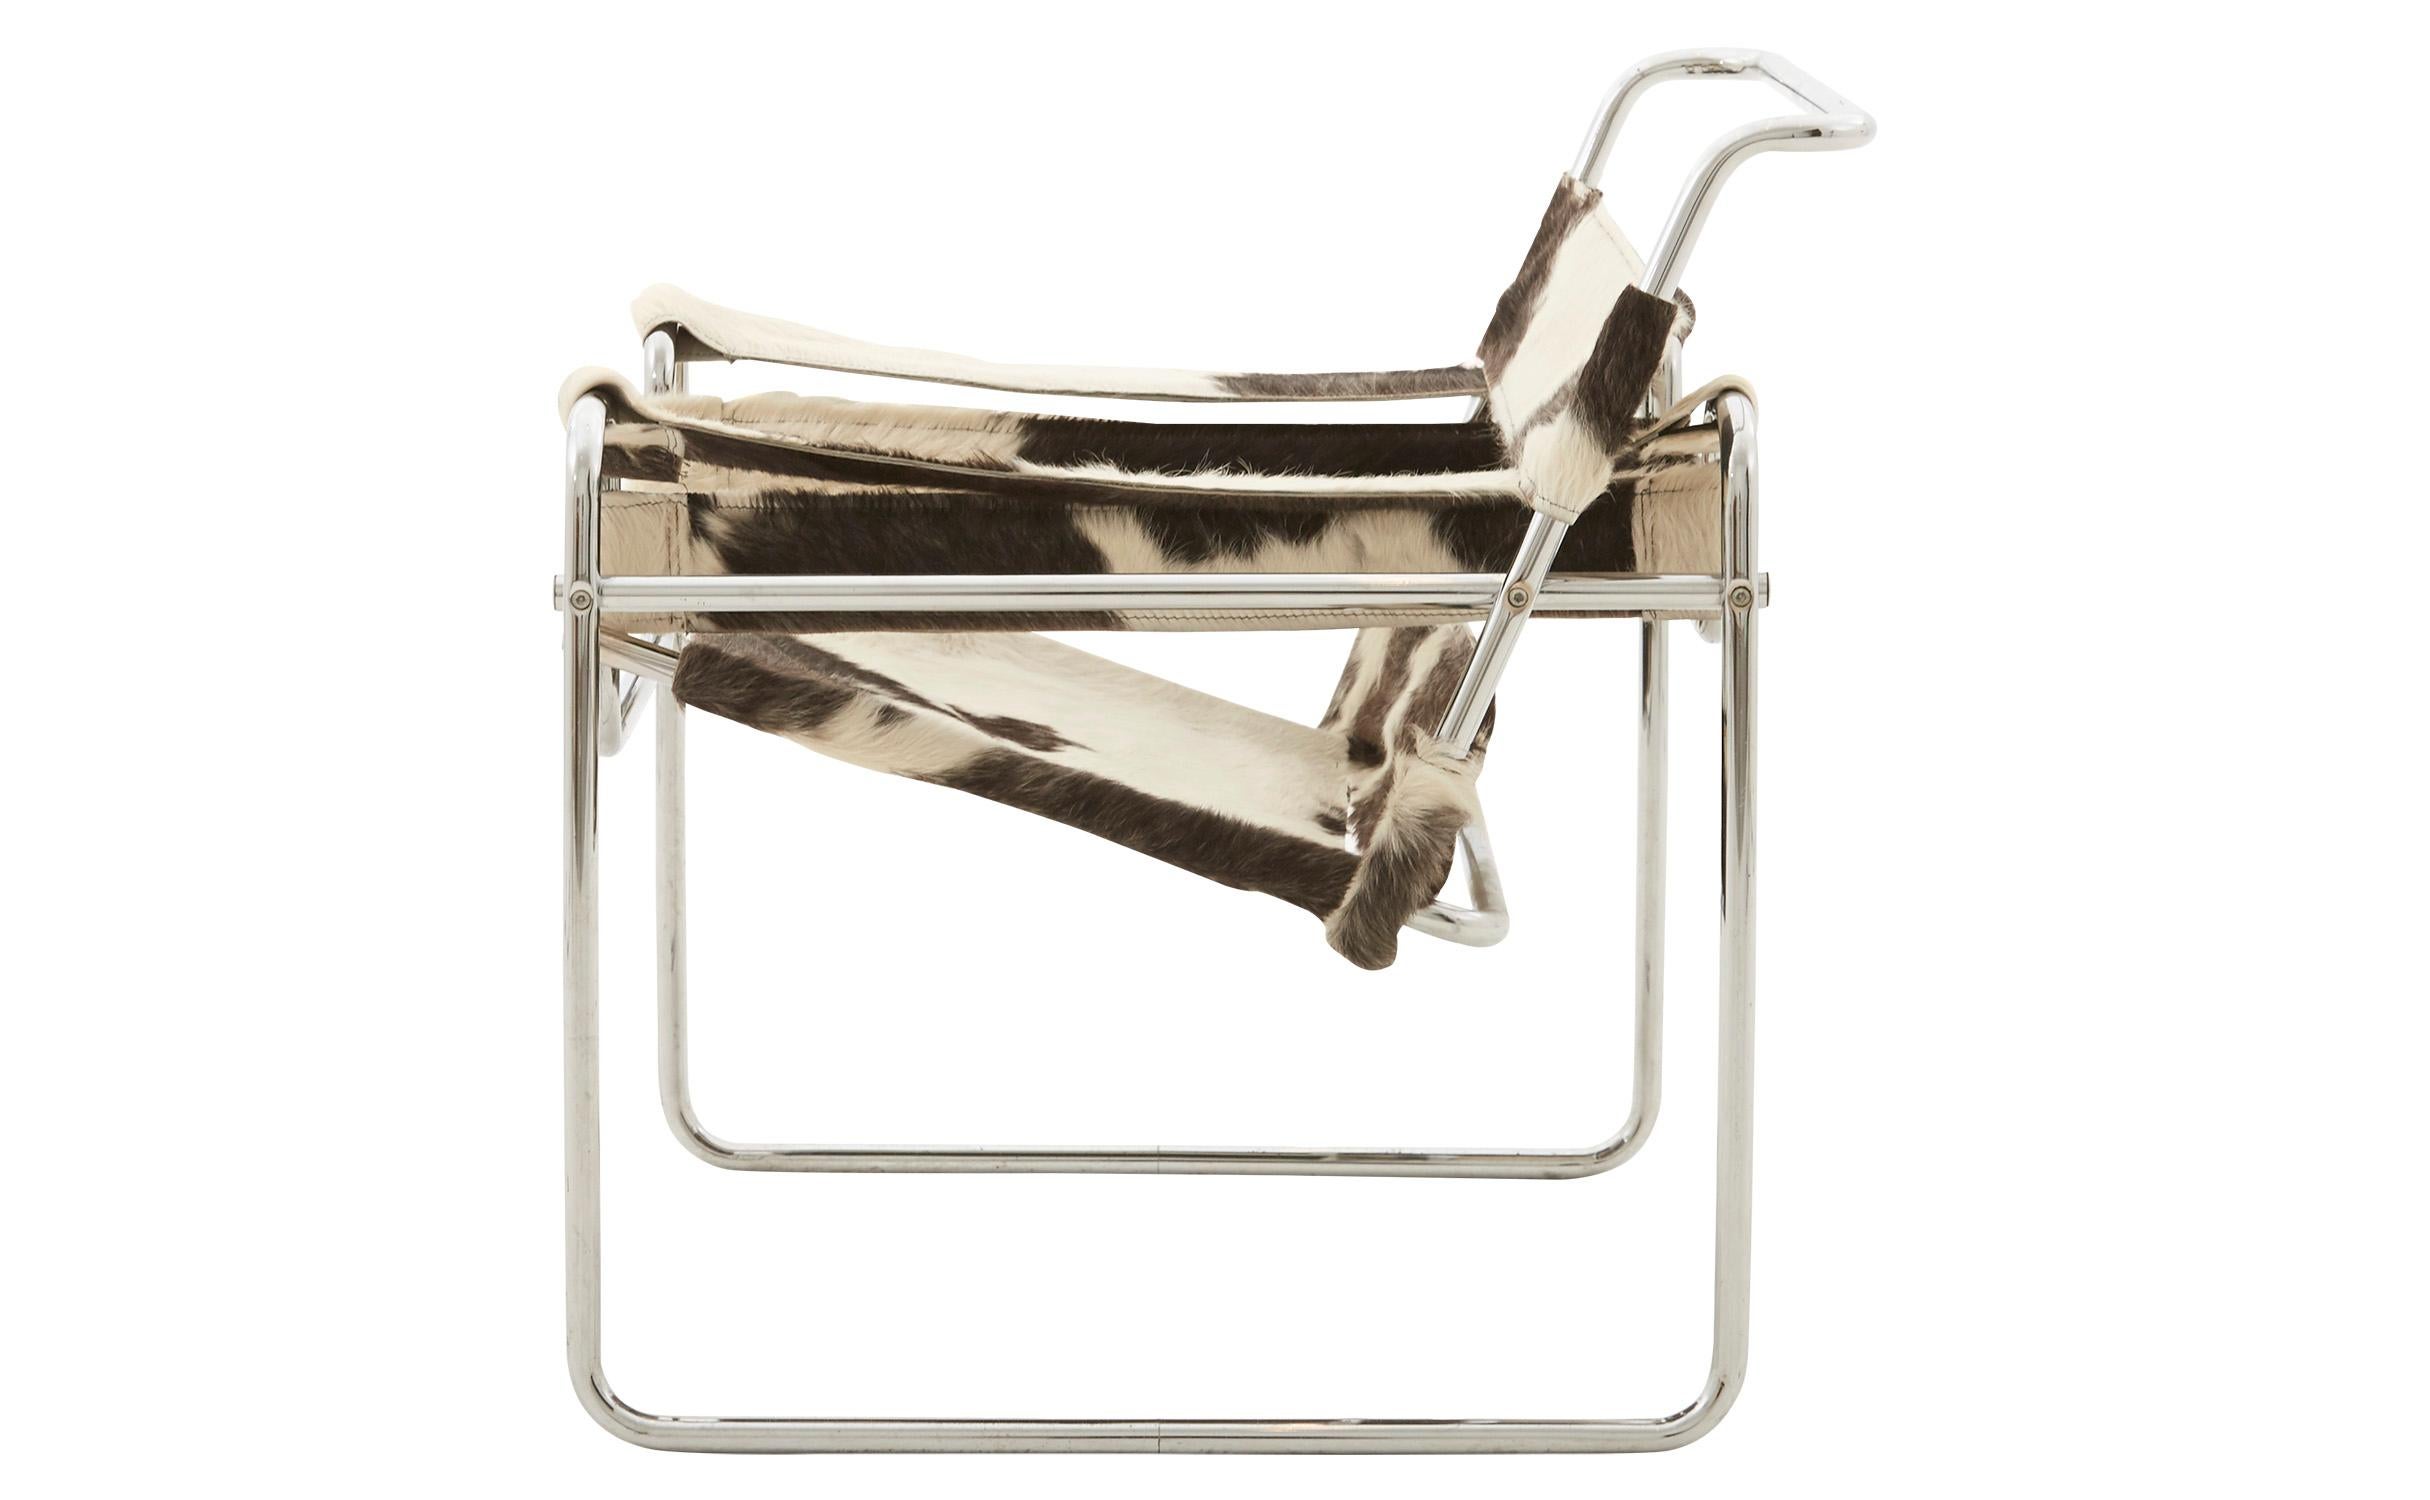 • Hair on hide upholstery as found
• Chrome frame
• 20th century
• American.

Dimensions:
• 31